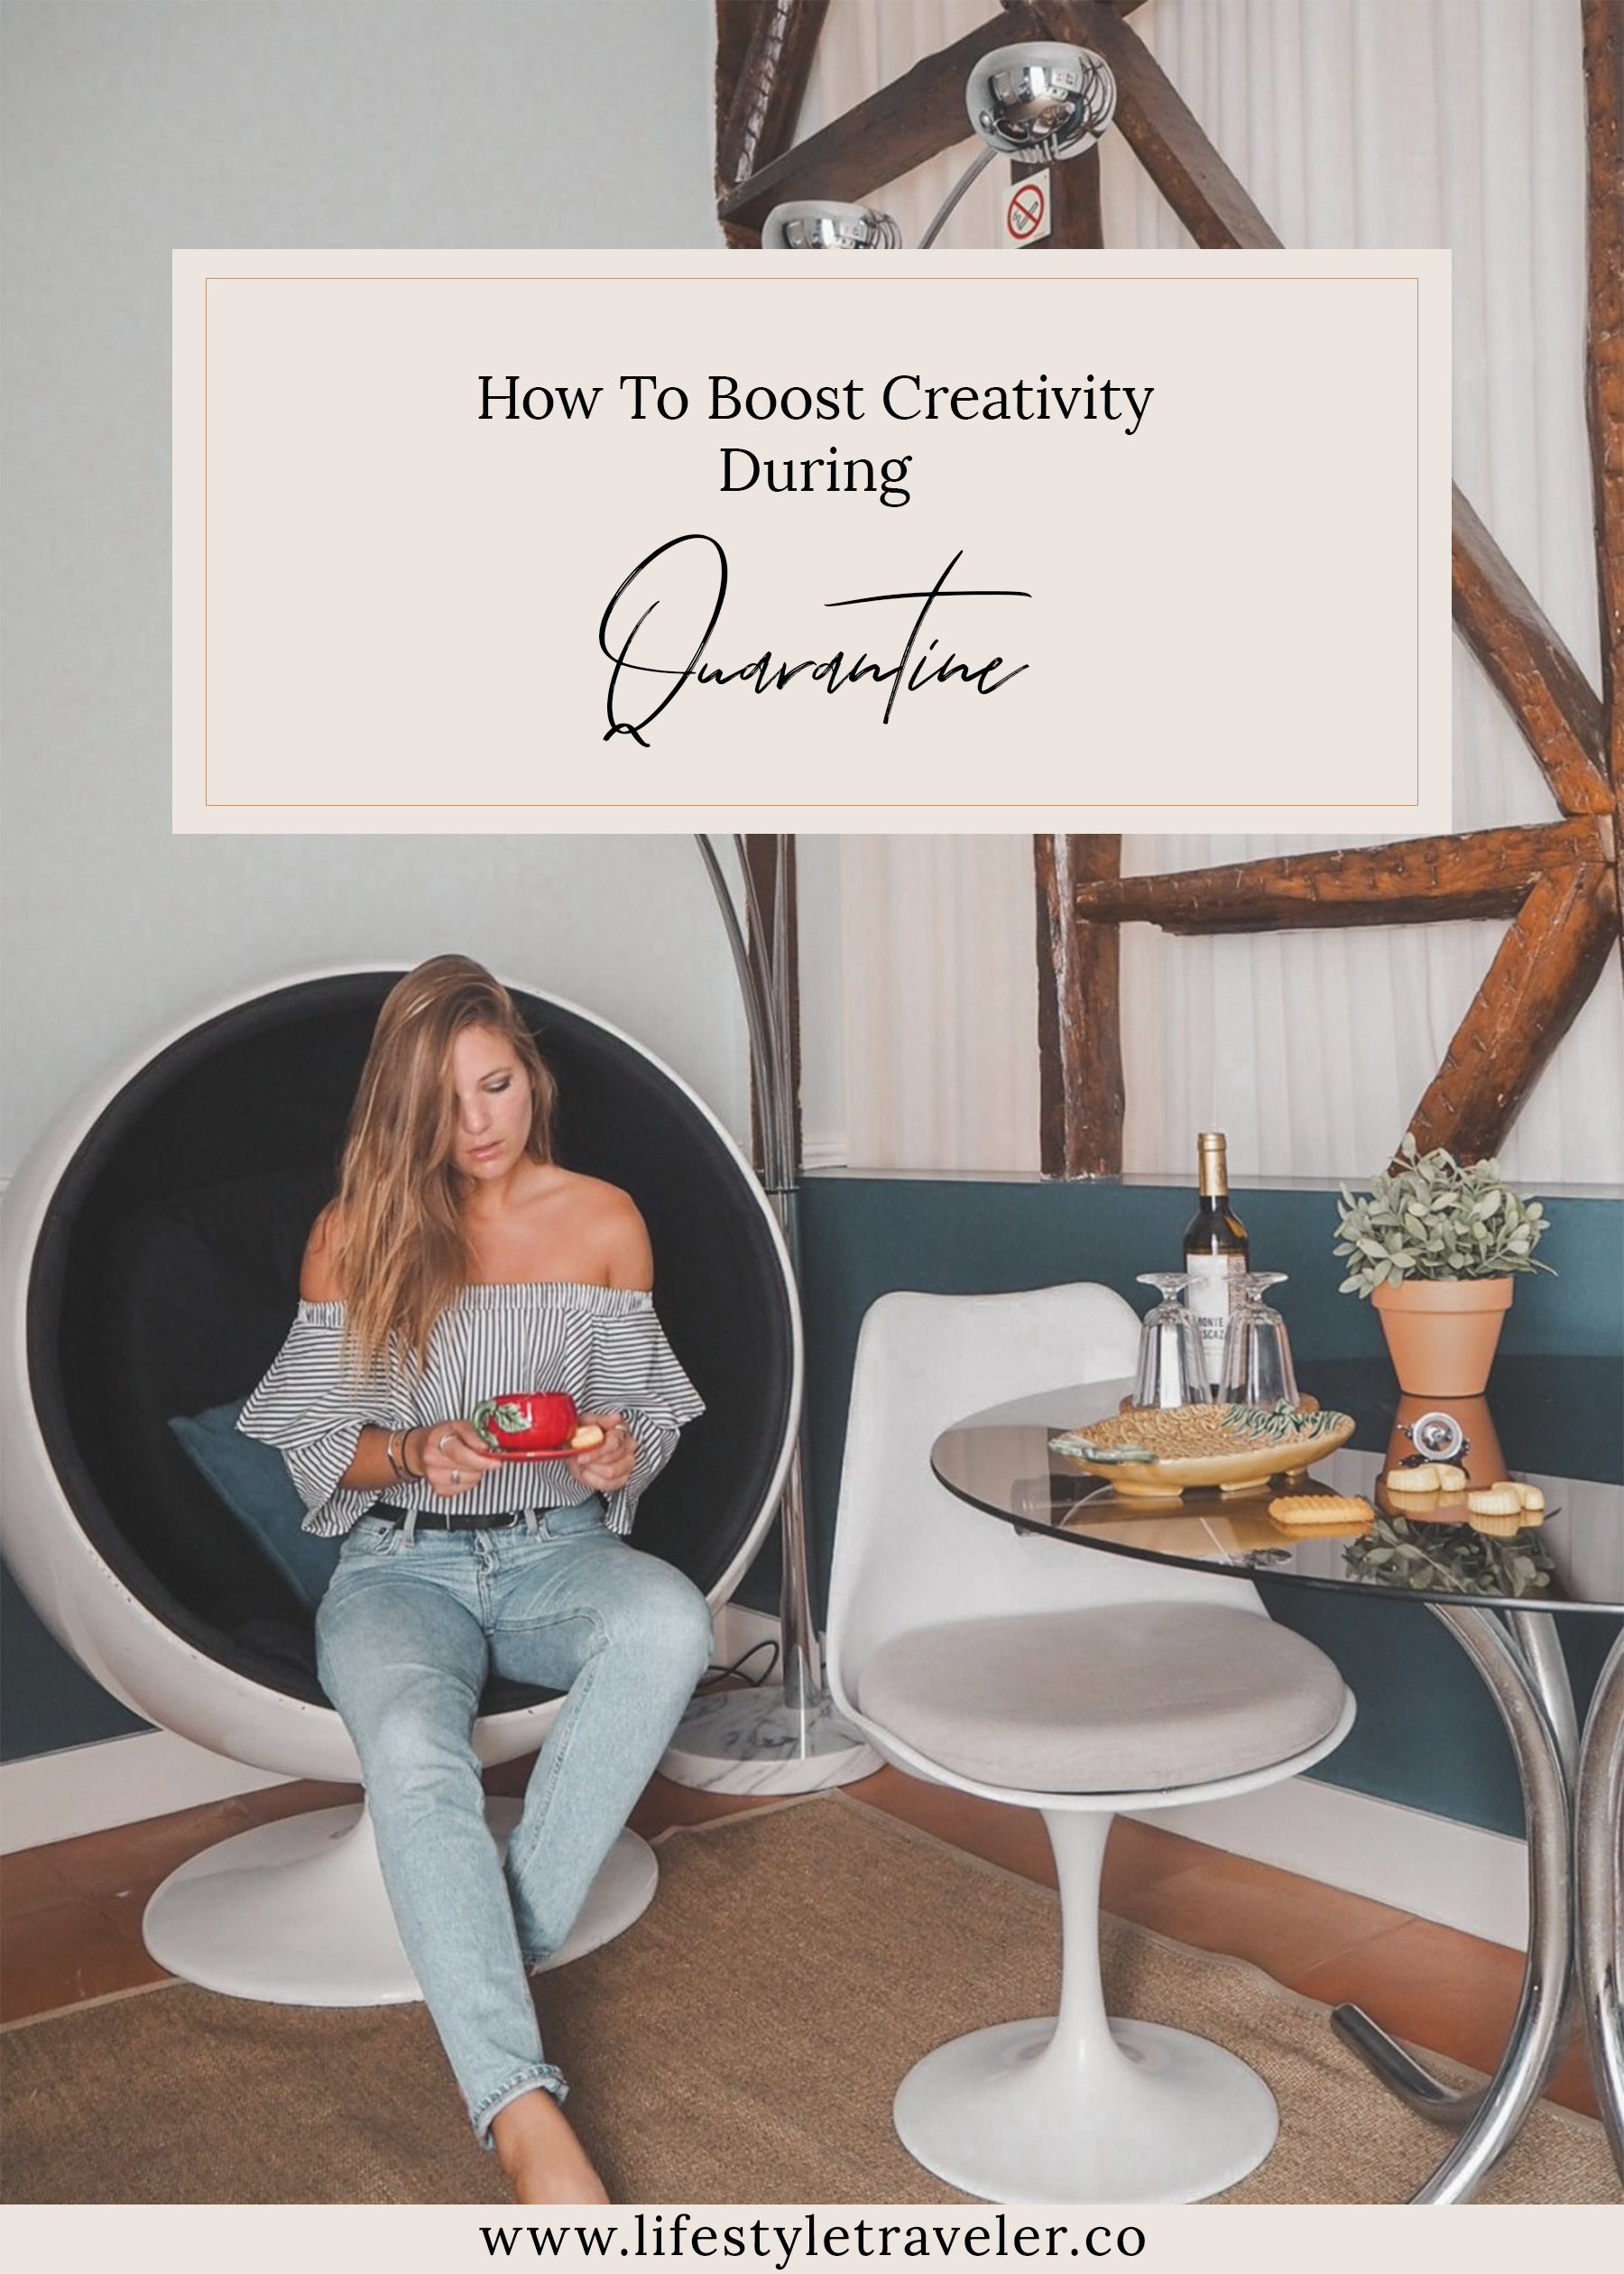 How To Boost Creativity During Quarantine | lifestyletraveler.co | IG: @lifestyletraveler.co